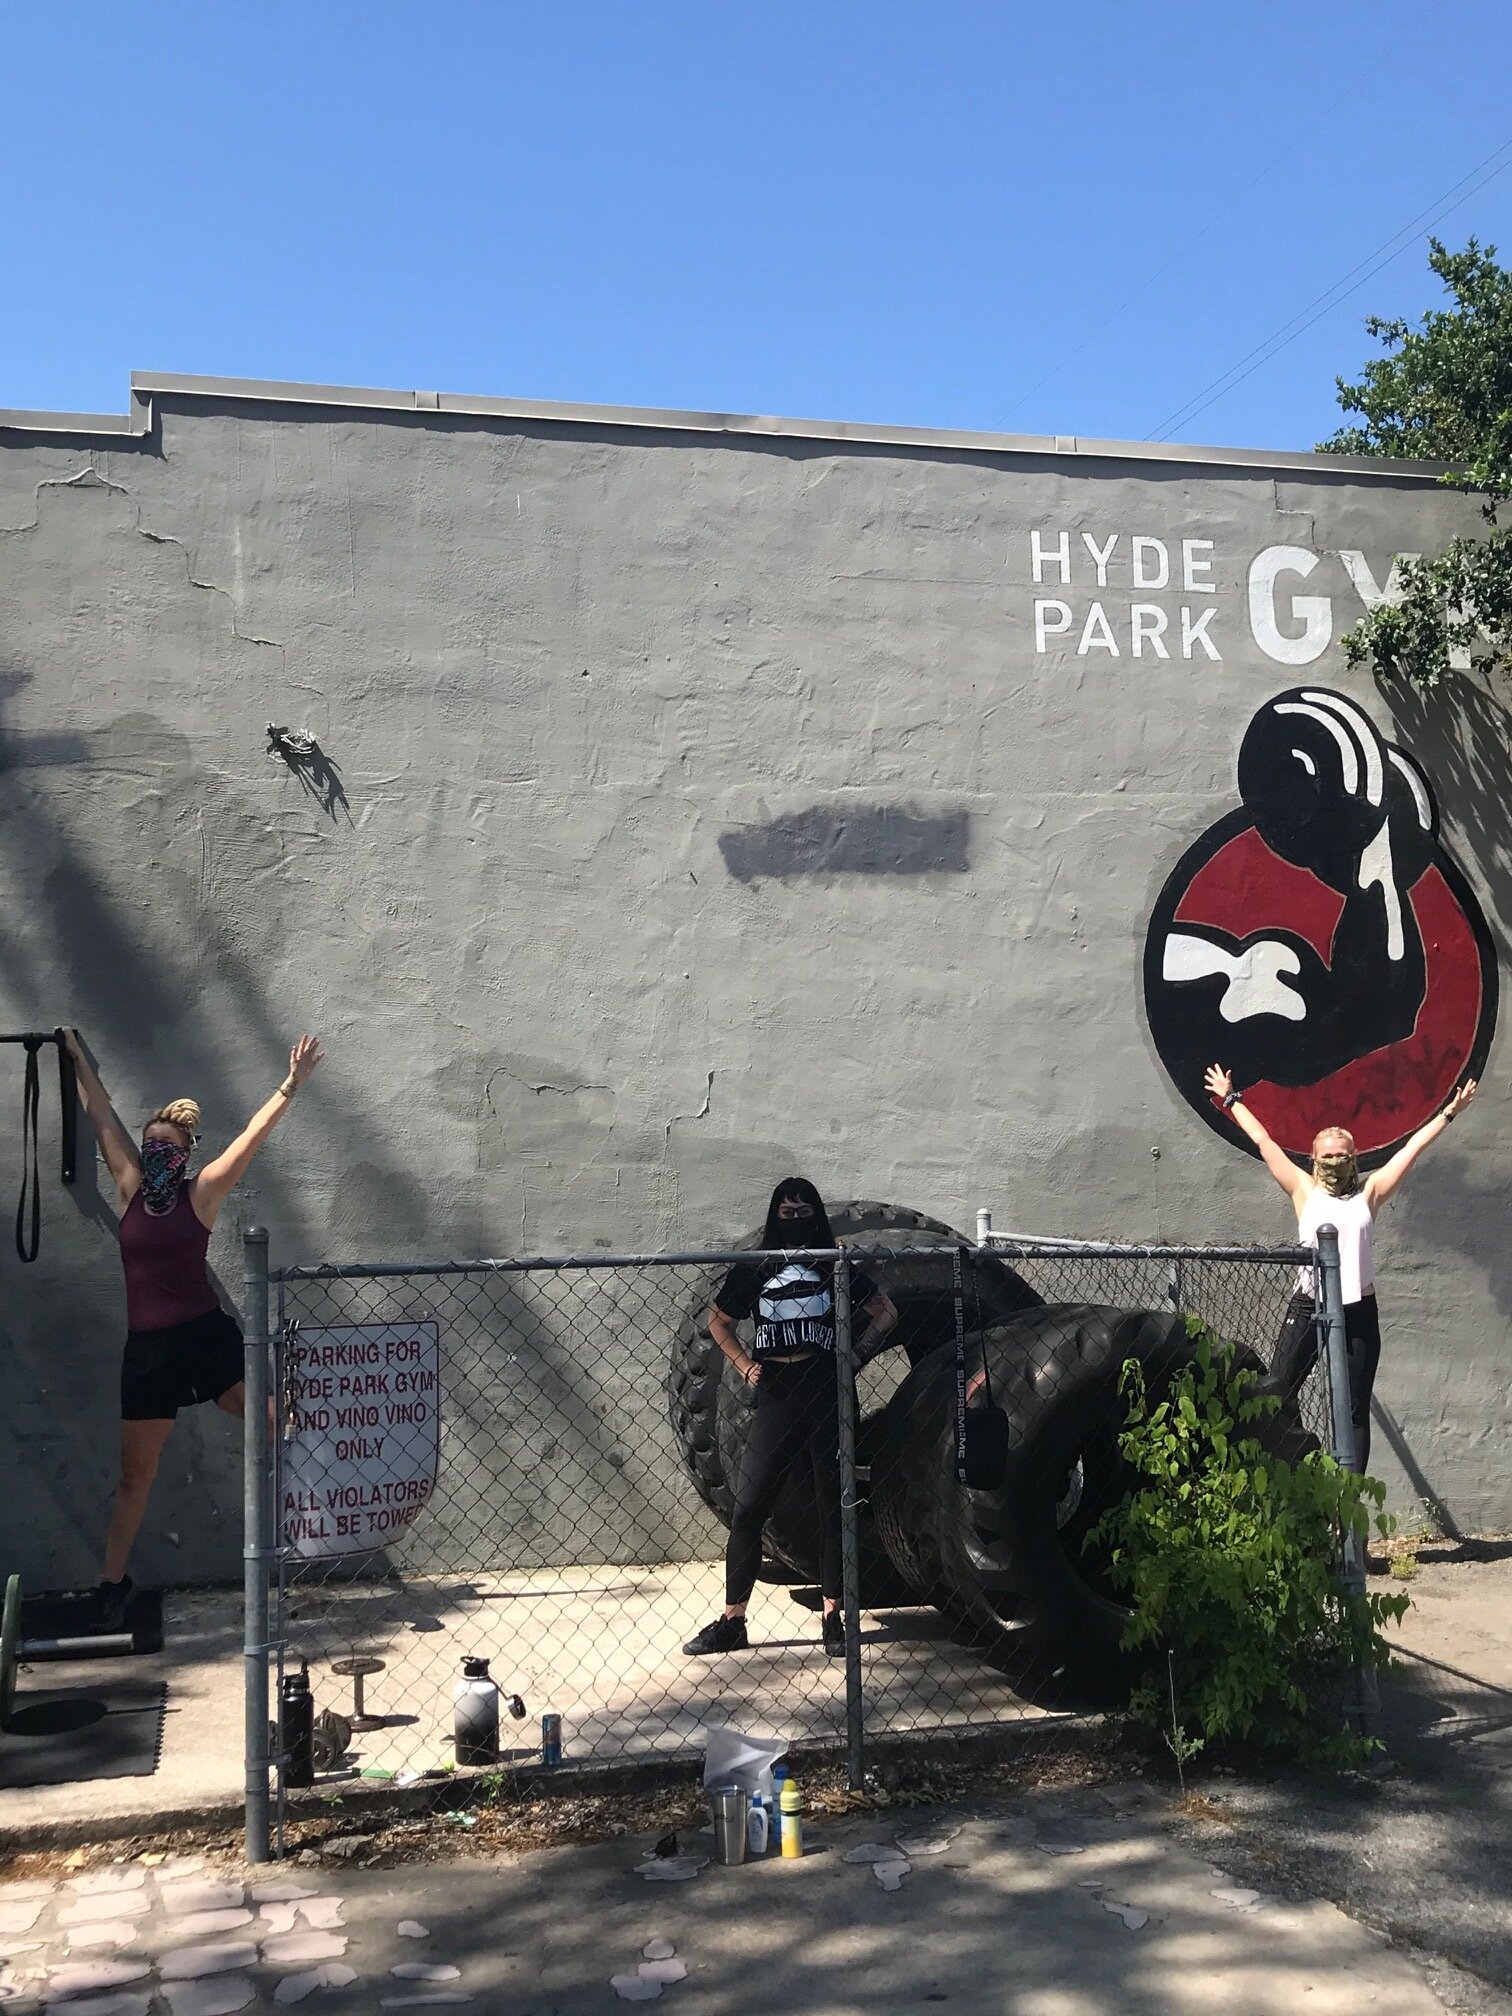 We’re back! Training safely outside at Hyde Park Gym.